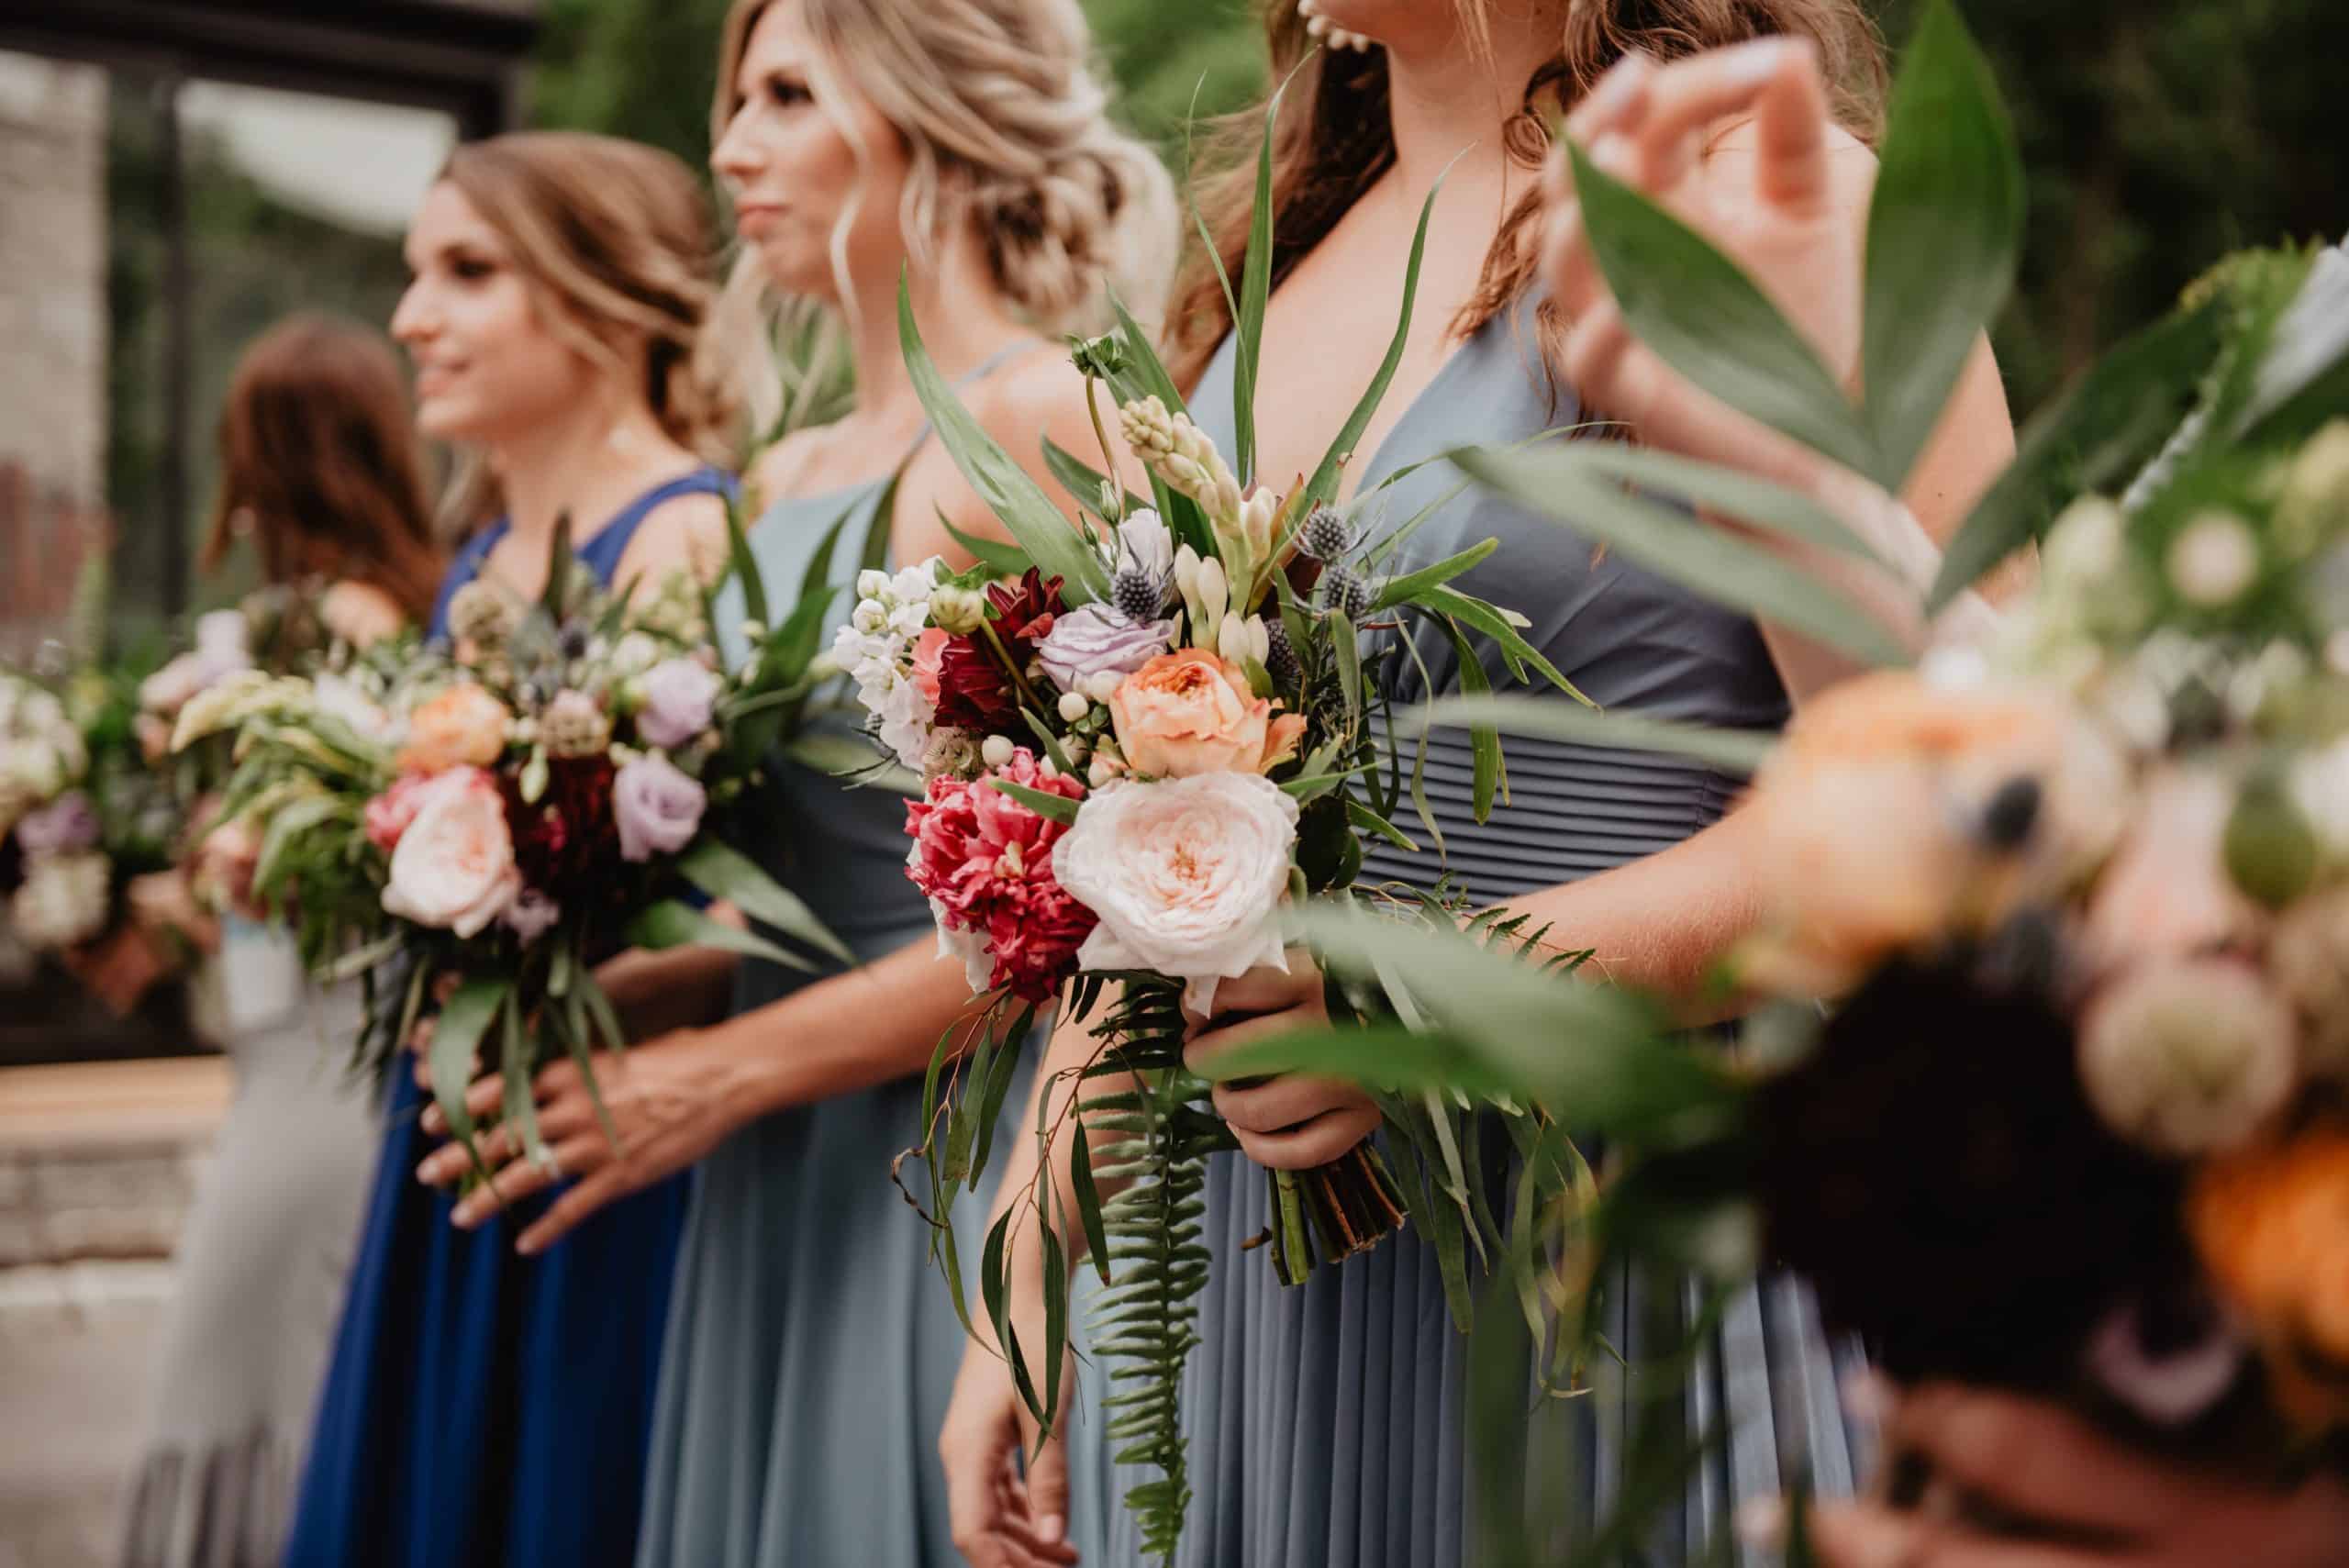 Bridesmaids hold bouquets at a wedding.